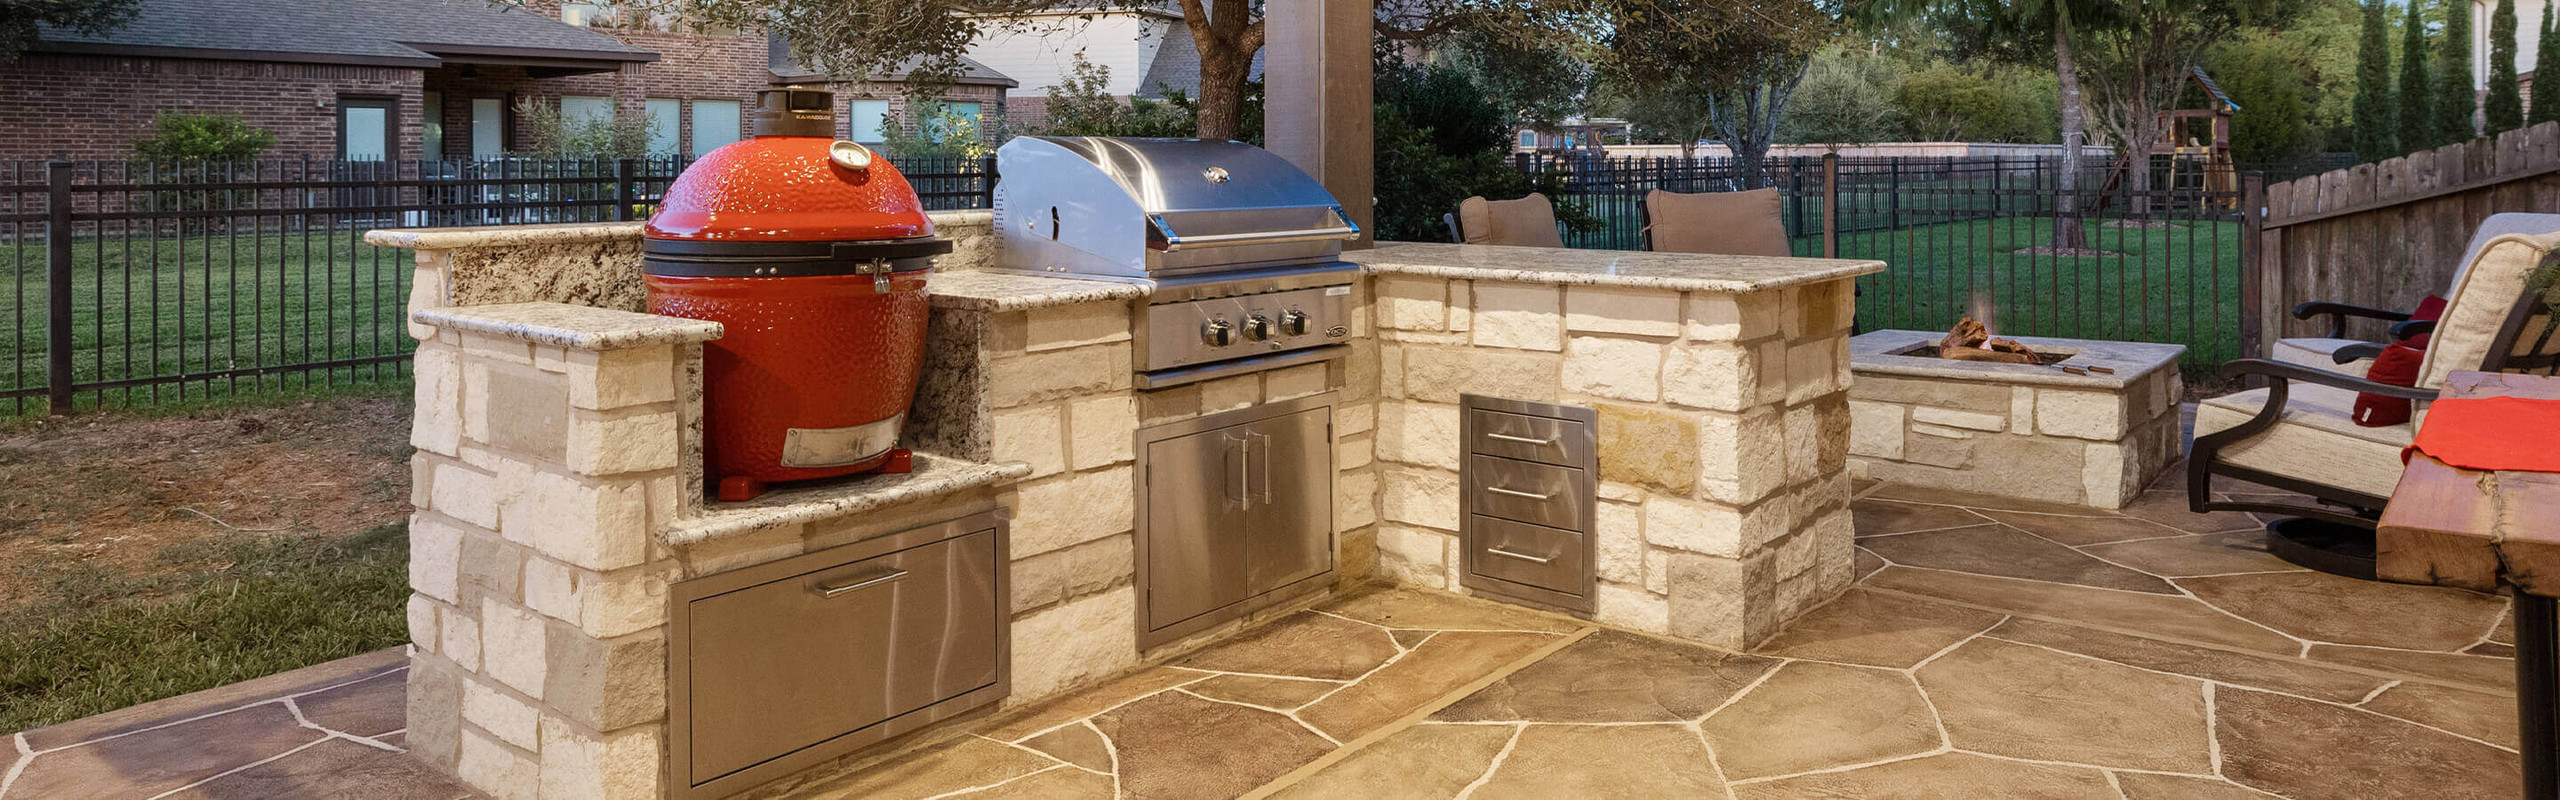 How to Design an Outdoor Kitchen with a Pizza Oven